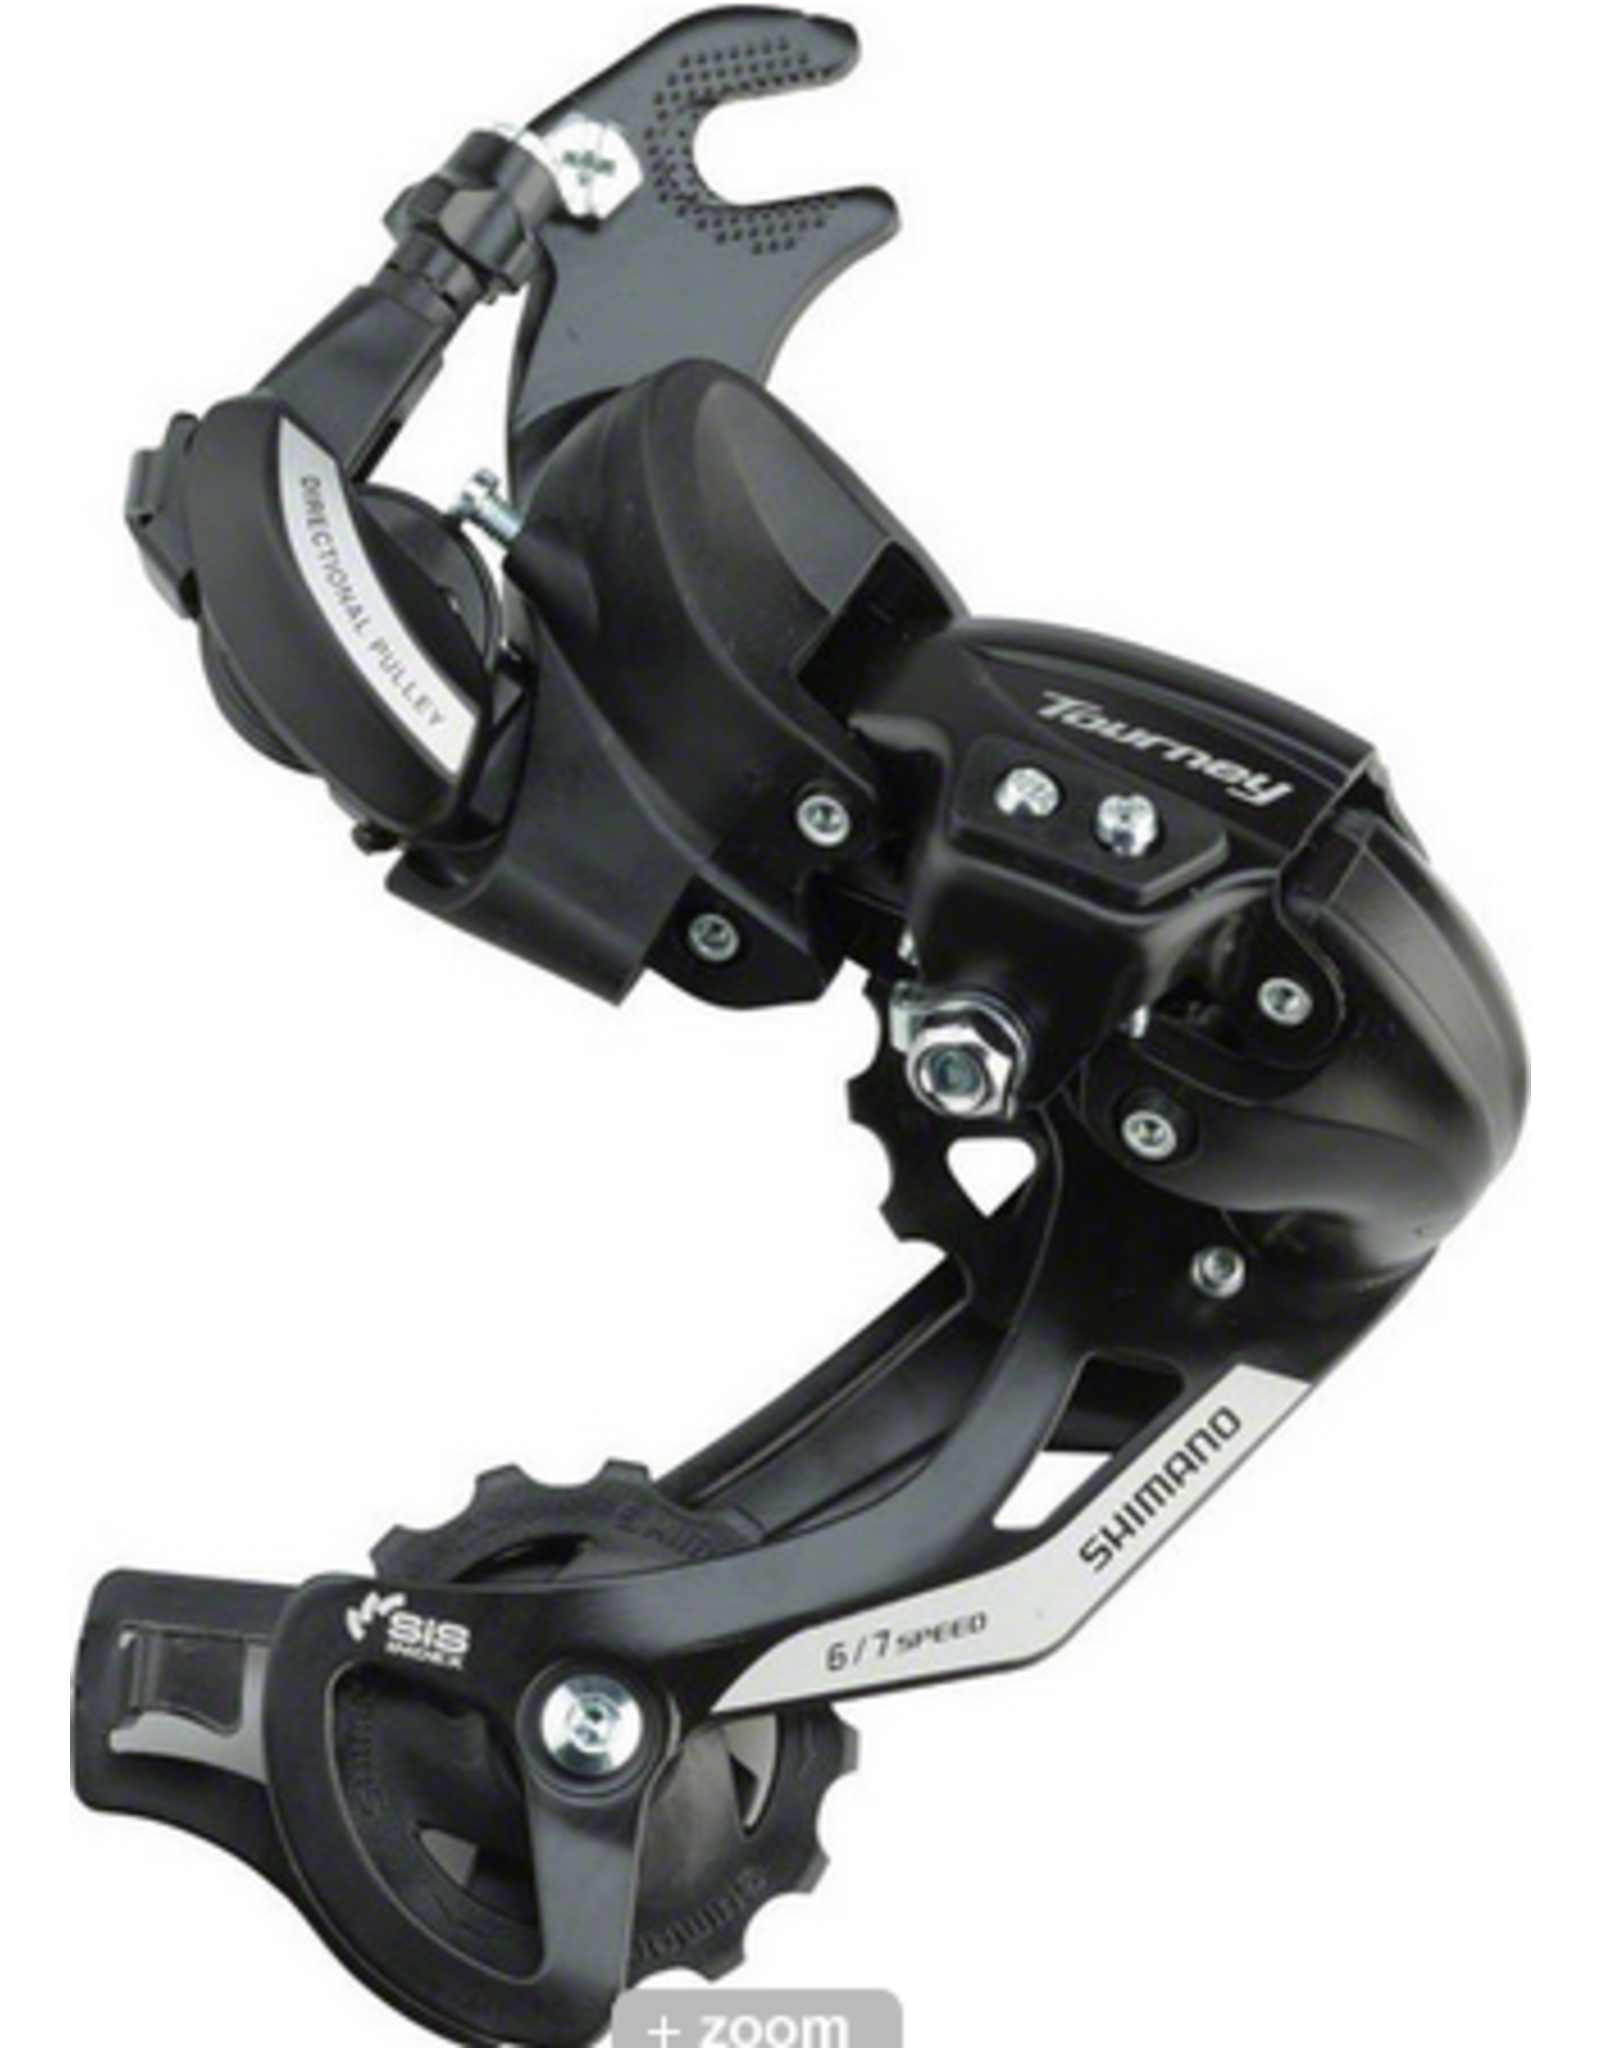 Shimano Shimano Tourney RD-TY500-SGS Rear Derailleur - 6,7 Speed, Long Cage, Black, Dropout Claw Hanger